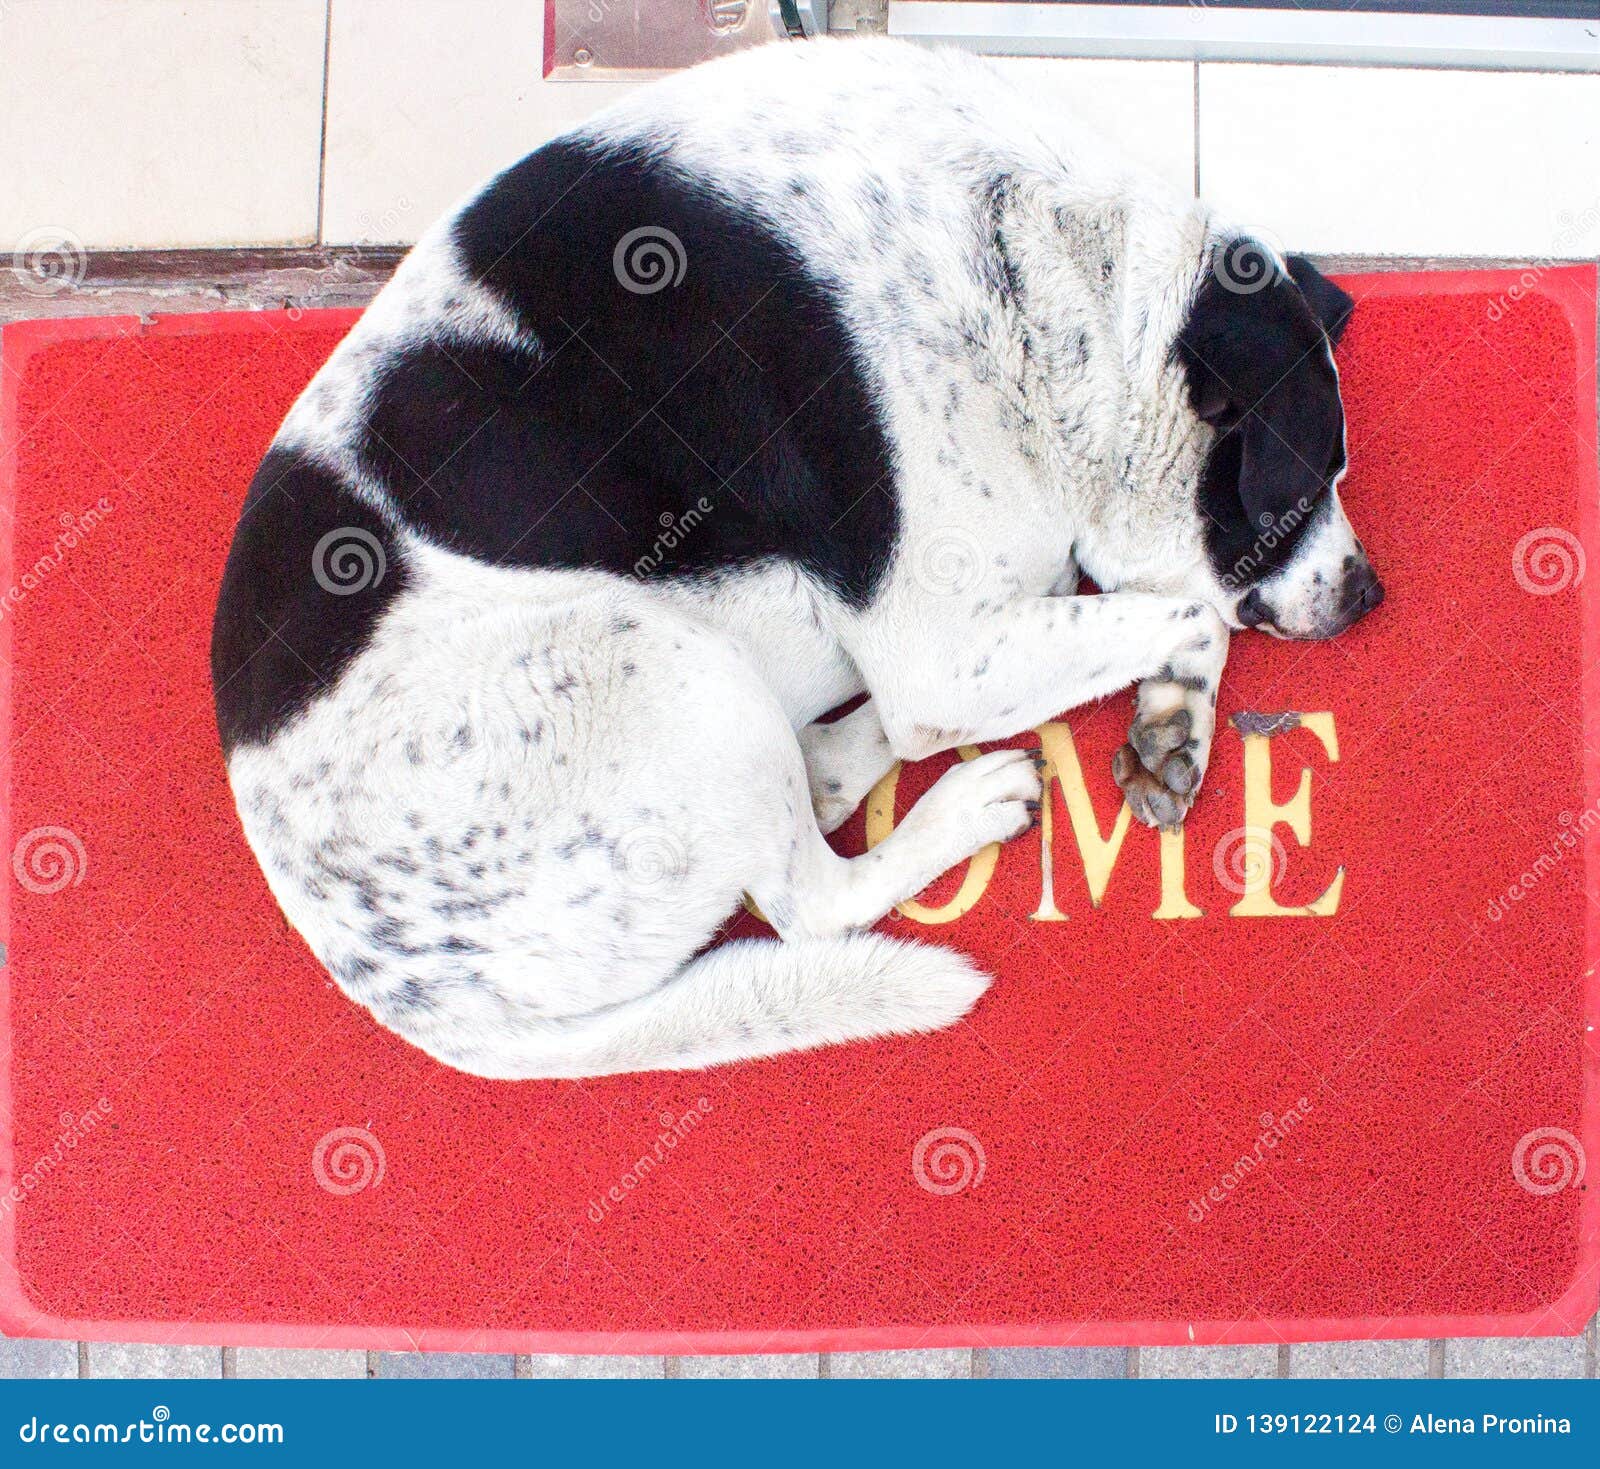 white and black dog with heart on the back sleeping on red carpet with word wellcome